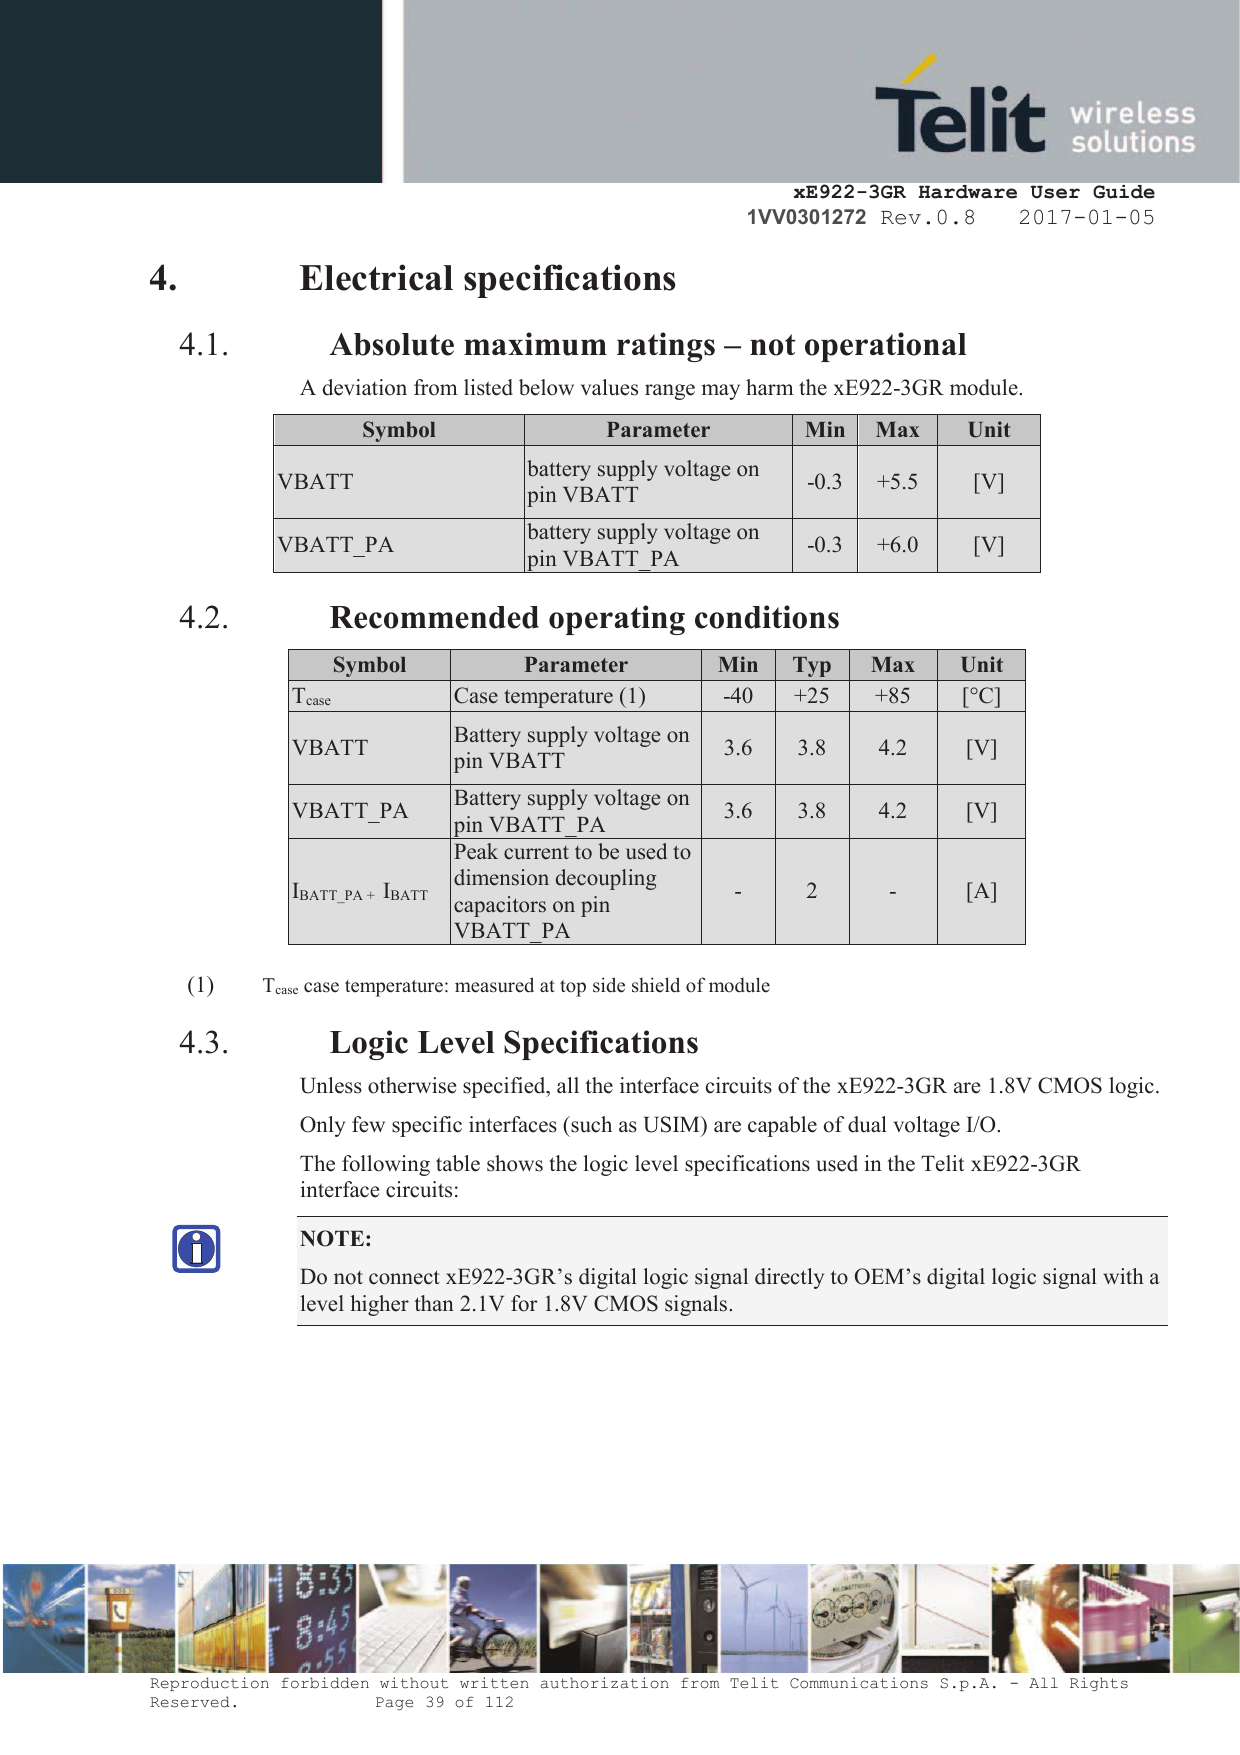     xE922-3GR Hardware User Guide 1VV0301272 Rev.0.8   2017-01-05 Reproduction forbidden without written authorization from Telit Communications S.p.A. - All Rights Reserved.    Page 39 of 112  4. Electrical specifications 4.1. Absolute maximum ratings – not operational A deviation from listed below values range may harm the xE922-3GR module. Symbol Parameter Min Max Unit VBATT battery supply voltage on pin VBATT -0.3 +5.5 [V] VBATT_PA battery supply voltage on pin VBATT_PA -0.3 +6.0 [V] 4.2. Recommended operating conditions Symbol Parameter Min Typ Max Unit Tcase Case temperature (1) -40 +25 +85 [°C] VBATT Battery supply voltage on pin VBATT 3.6 3.8 4.2 [V] VBATT_PA Battery supply voltage on pin VBATT_PA 3.6 3.8 4.2 [V] IBATT_PA +  IBATT Peak current to be used to dimension decoupling capacitors on pin VBATT_PA - 2 - [A]  (1) Tcase case temperature: measured at top side shield of module 4.3. Logic Level Specifications Unless otherwise specified, all the interface circuits of the xE922-3GR are 1.8V CMOS logic. Only few specific interfaces (such as USIM) are capable of dual voltage I/O. The following table shows the logic level specifications used in the Telit xE922-3GR interface circuits: NOTE:  Do not connect xE922-3GR’s digital logic signal directly to OEM’s digital logic signal with a level higher than 2.1V for 1.8V CMOS signals.       